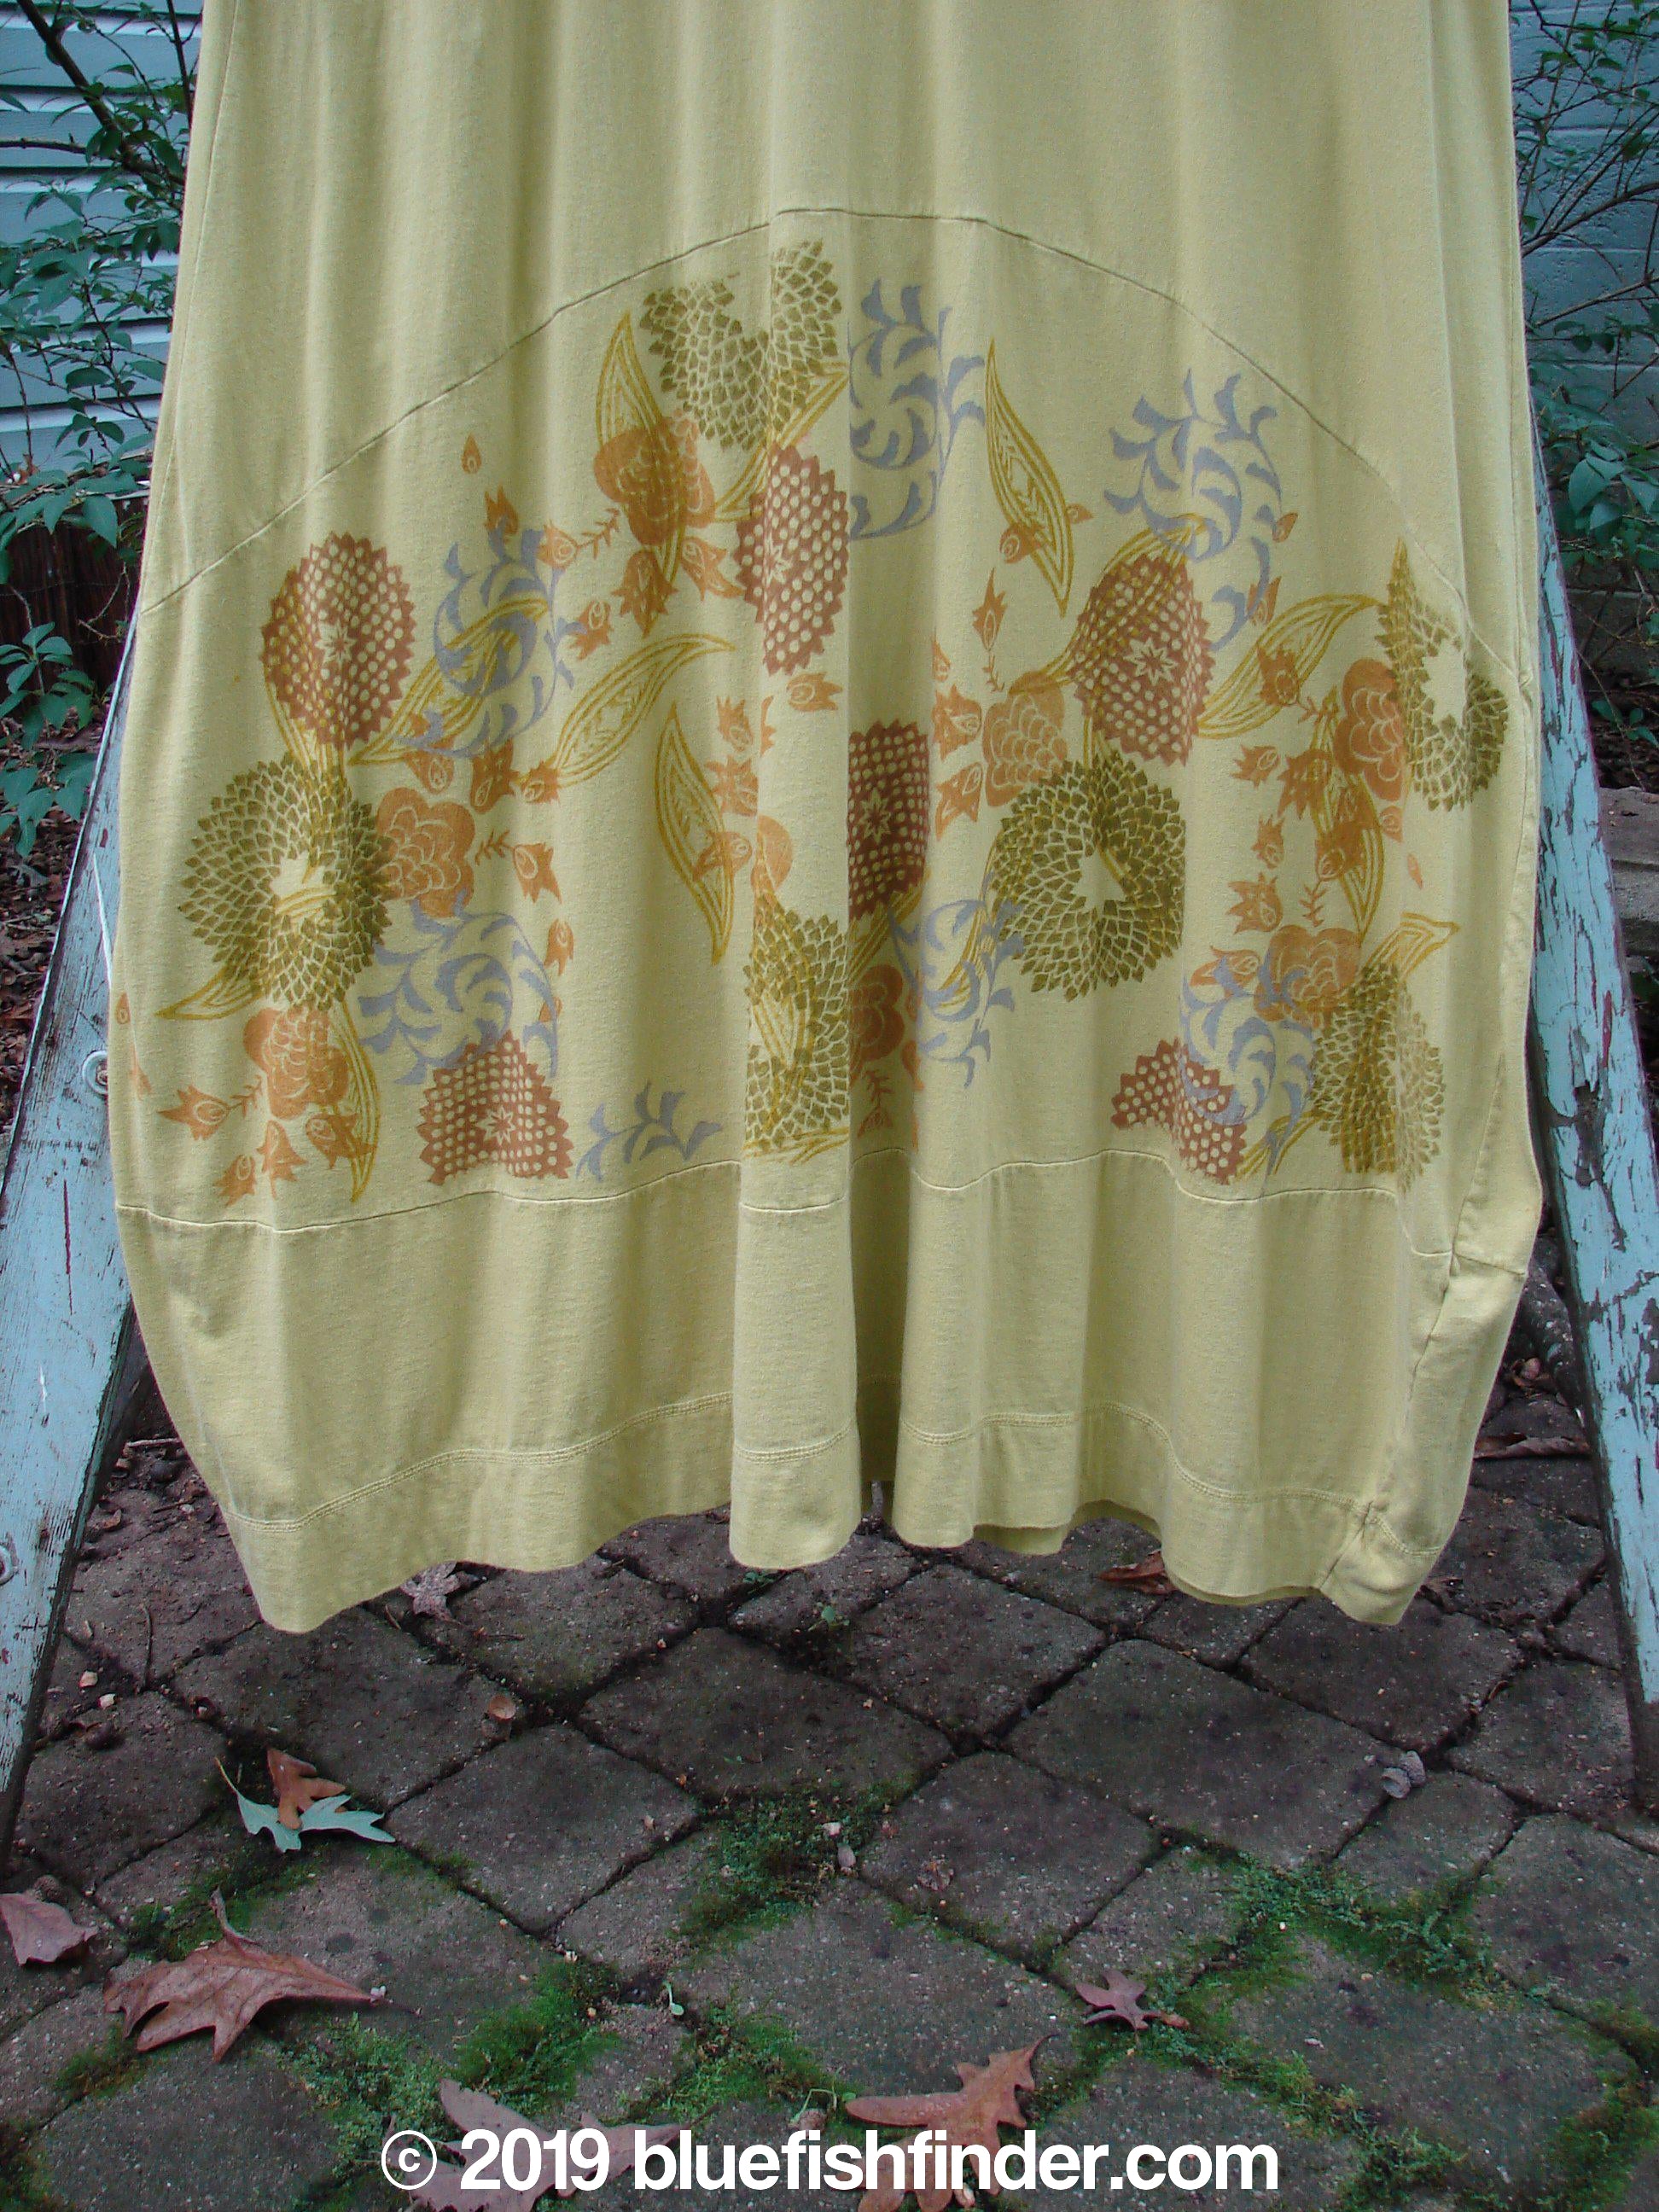 Image alt text: Barclay Gather Sectional Banded Petal Dress - a yellow dress with a floral design, featuring a V-shaped neckline, banded lower short sleeves, and a sweeping A-line shape. Perfect for a whimsical garden theme.